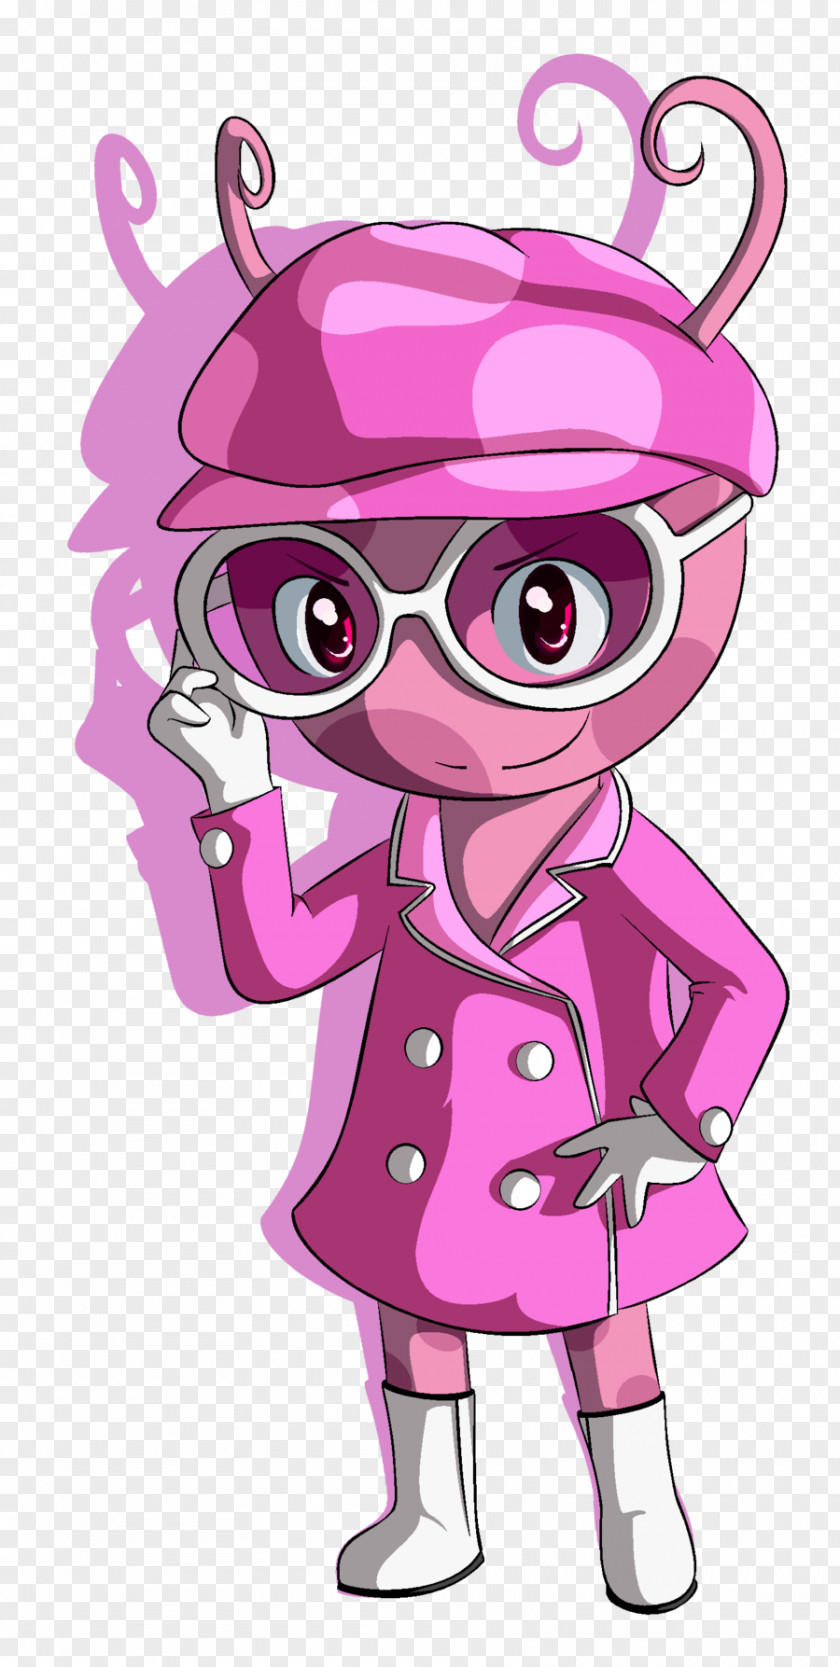 Uniqua Lady In Pink Nick Jr. Drawing Front Page News! PNG